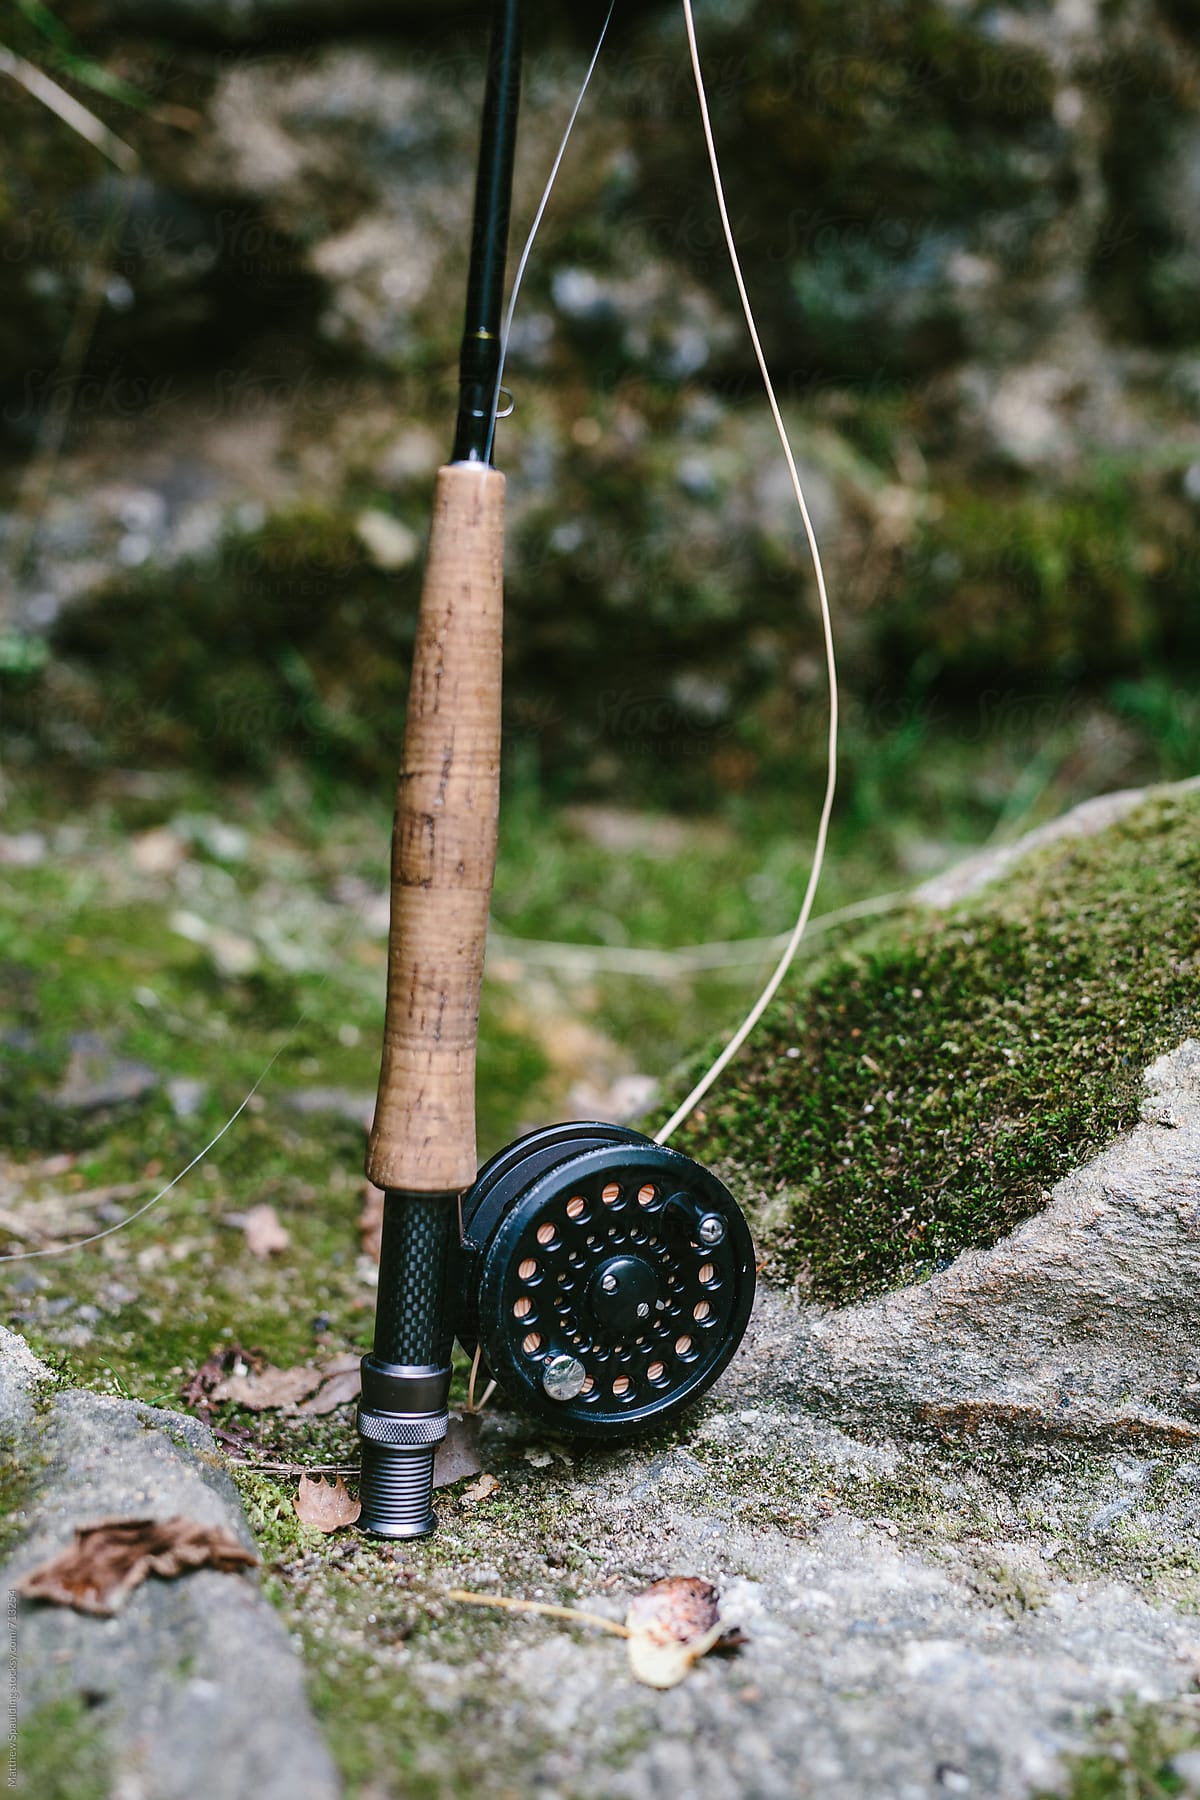 Fishing rod and reel on rocky riverbank ready to catch fish